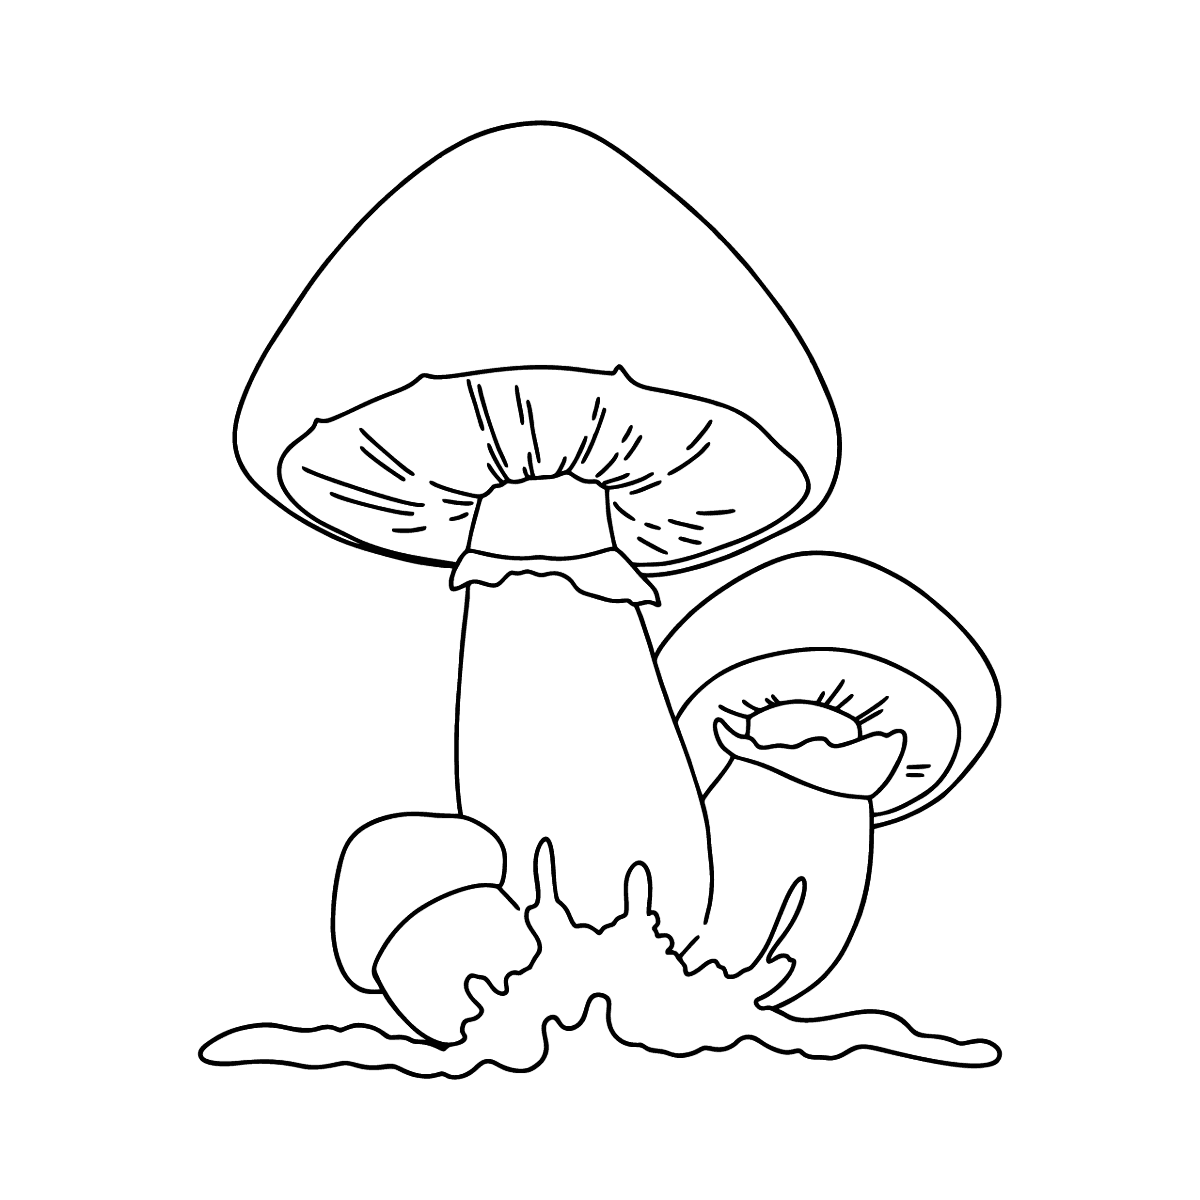 Champignons coloring page ♥ Online or Printable for Free!